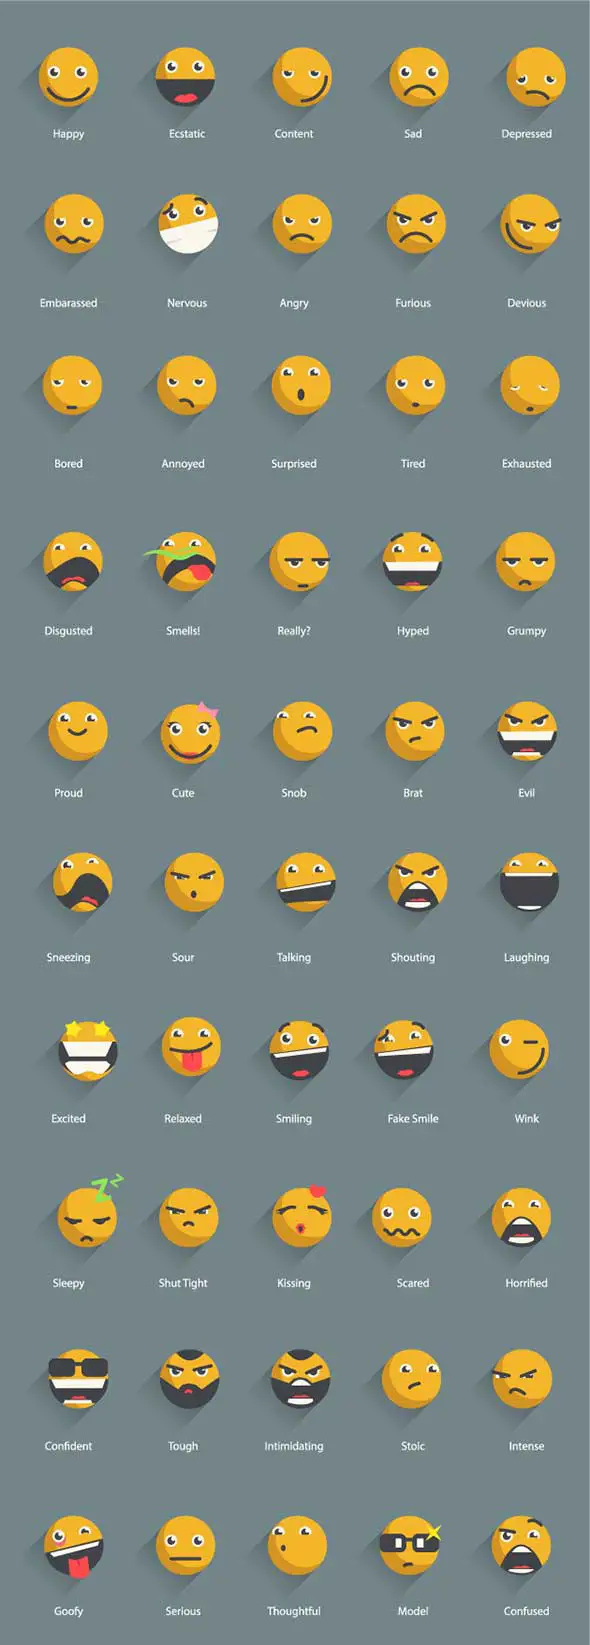 3-Yellow-shadowed-emoticons-icons-free-vector